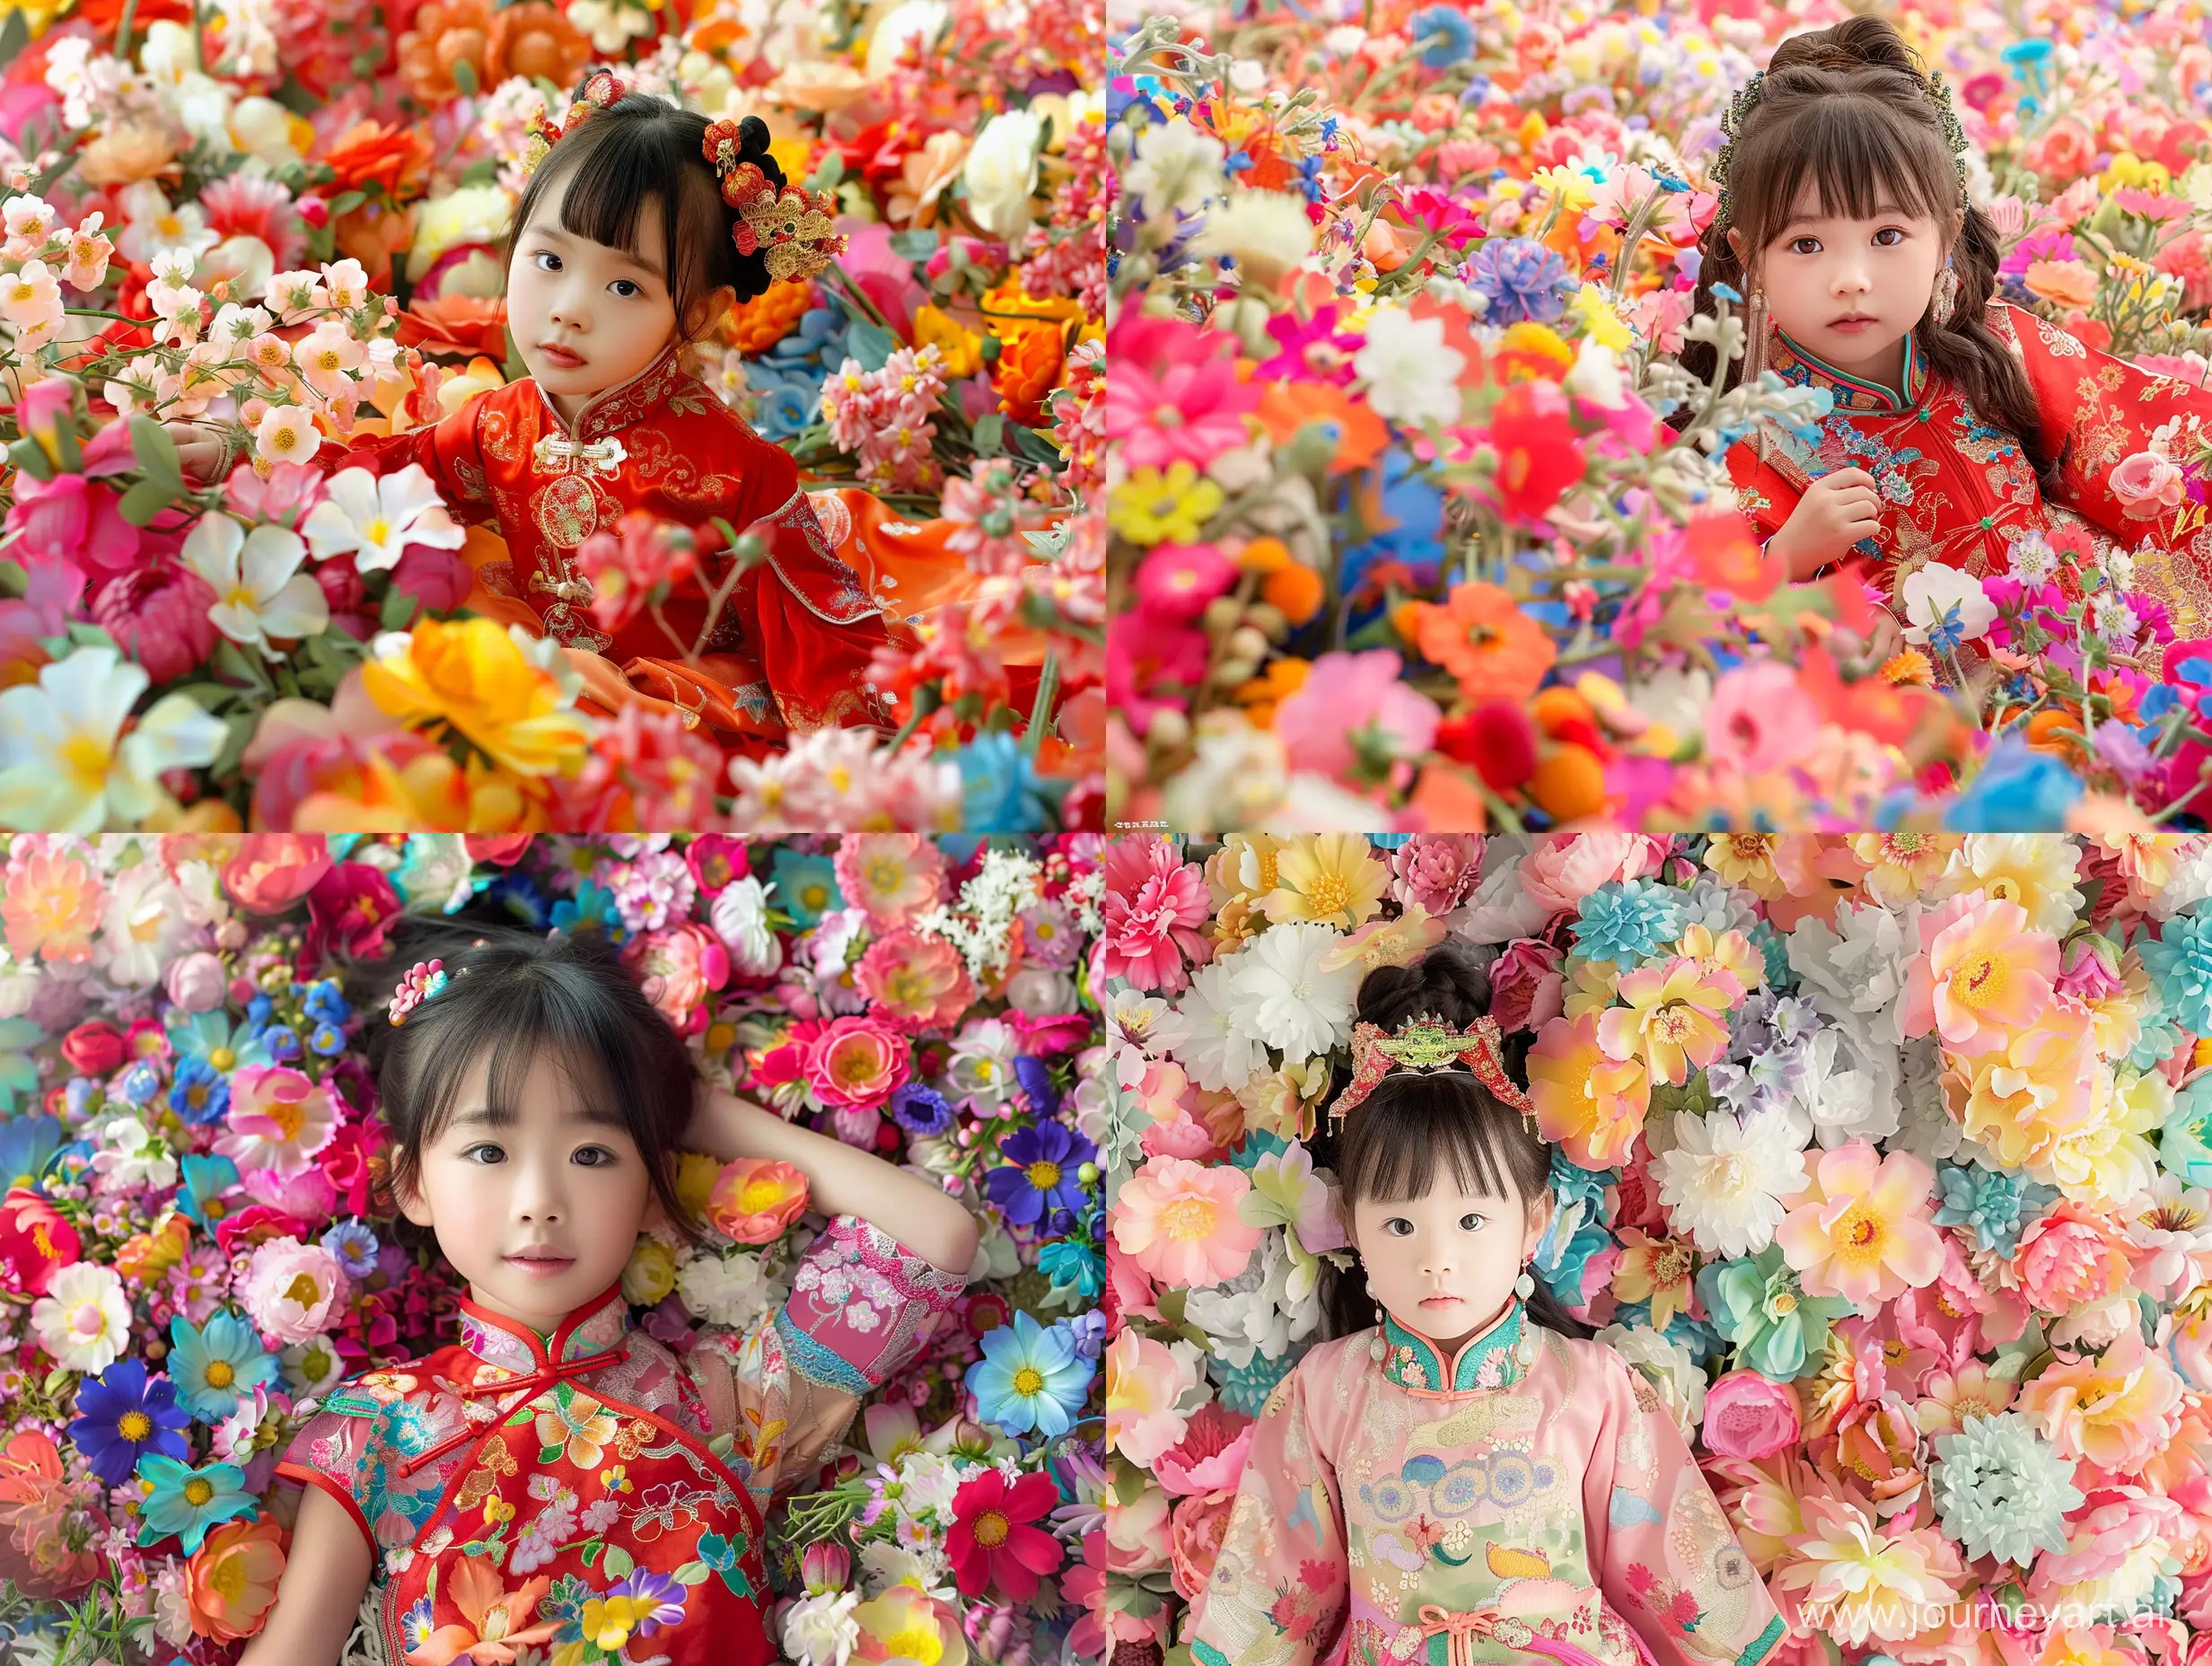 Chinese-Girl-Surrounded-by-Vibrant-Floral-Landscape